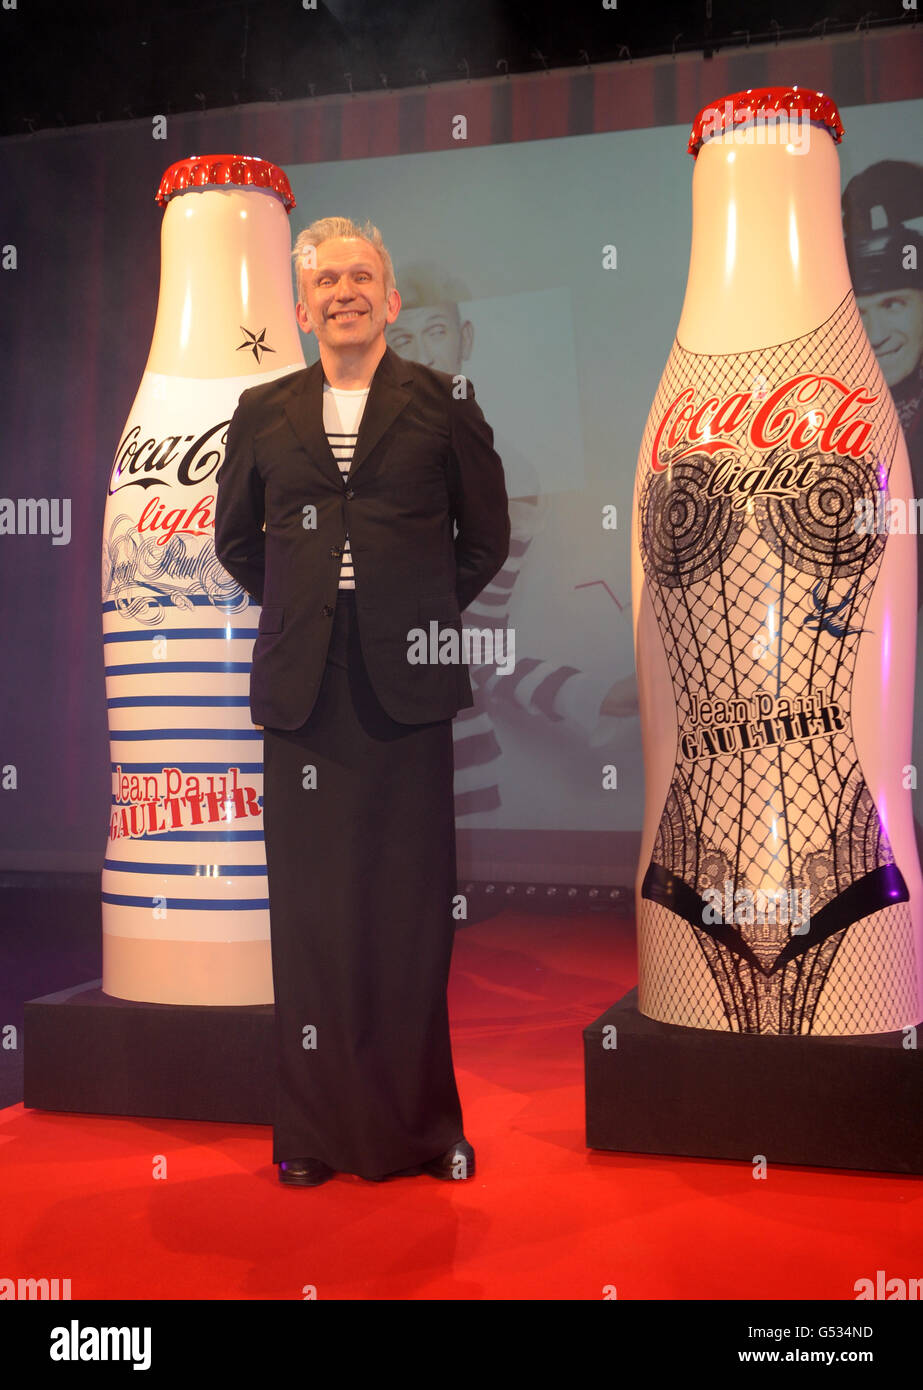 Coca-Cola light, Diet Coke and Jean Paul Gaultier host the launch party for their limited edition bottle collection at Le Trianon in Paris. Stock Photo